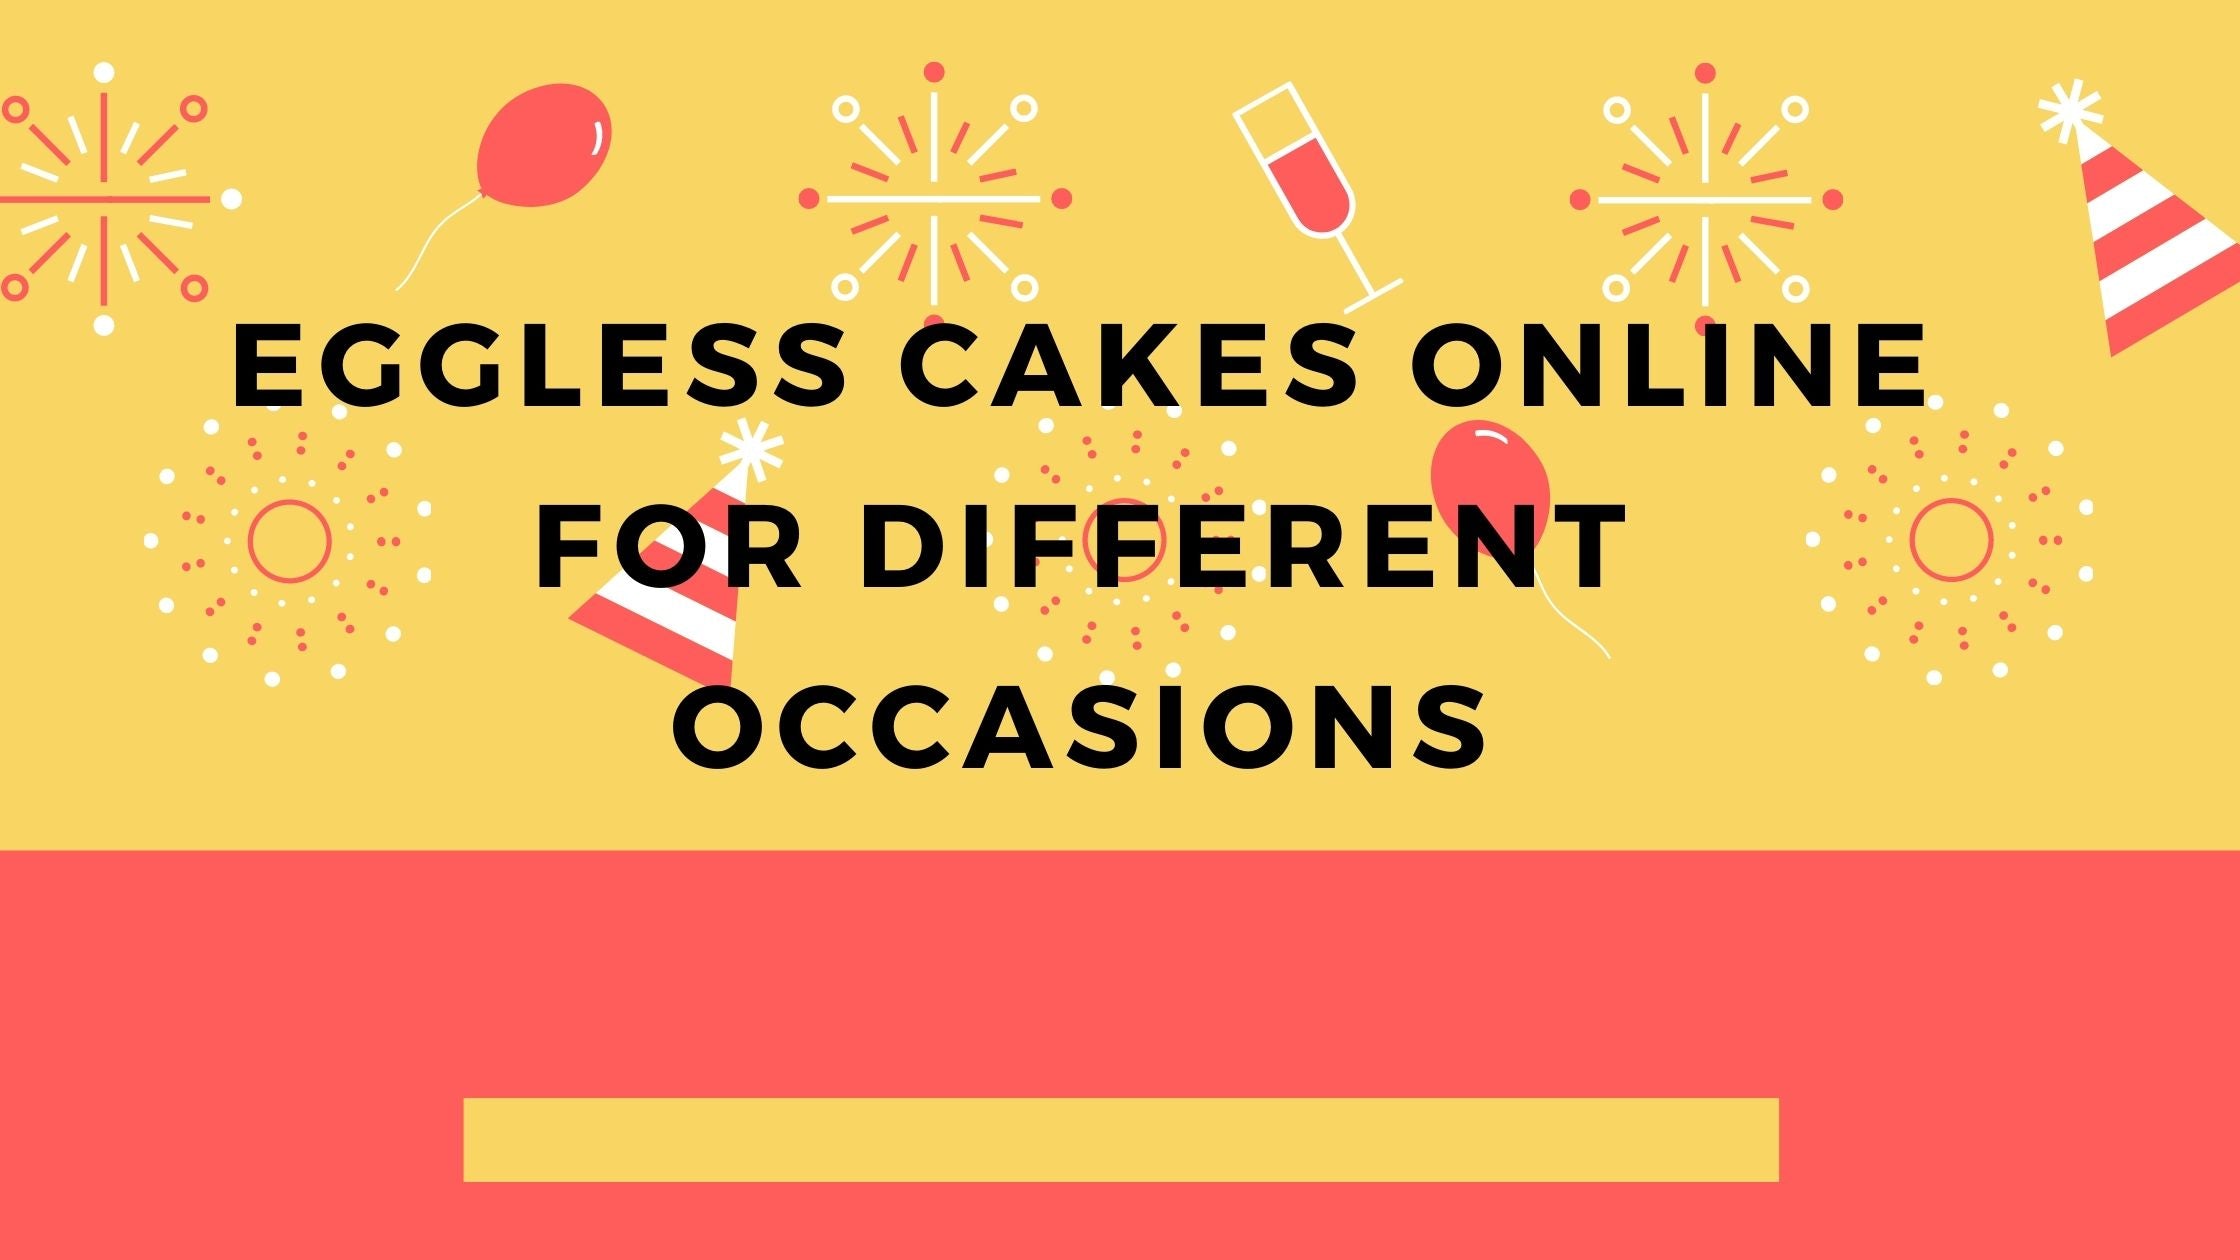 Eggless Cakes Online for Different Occasions